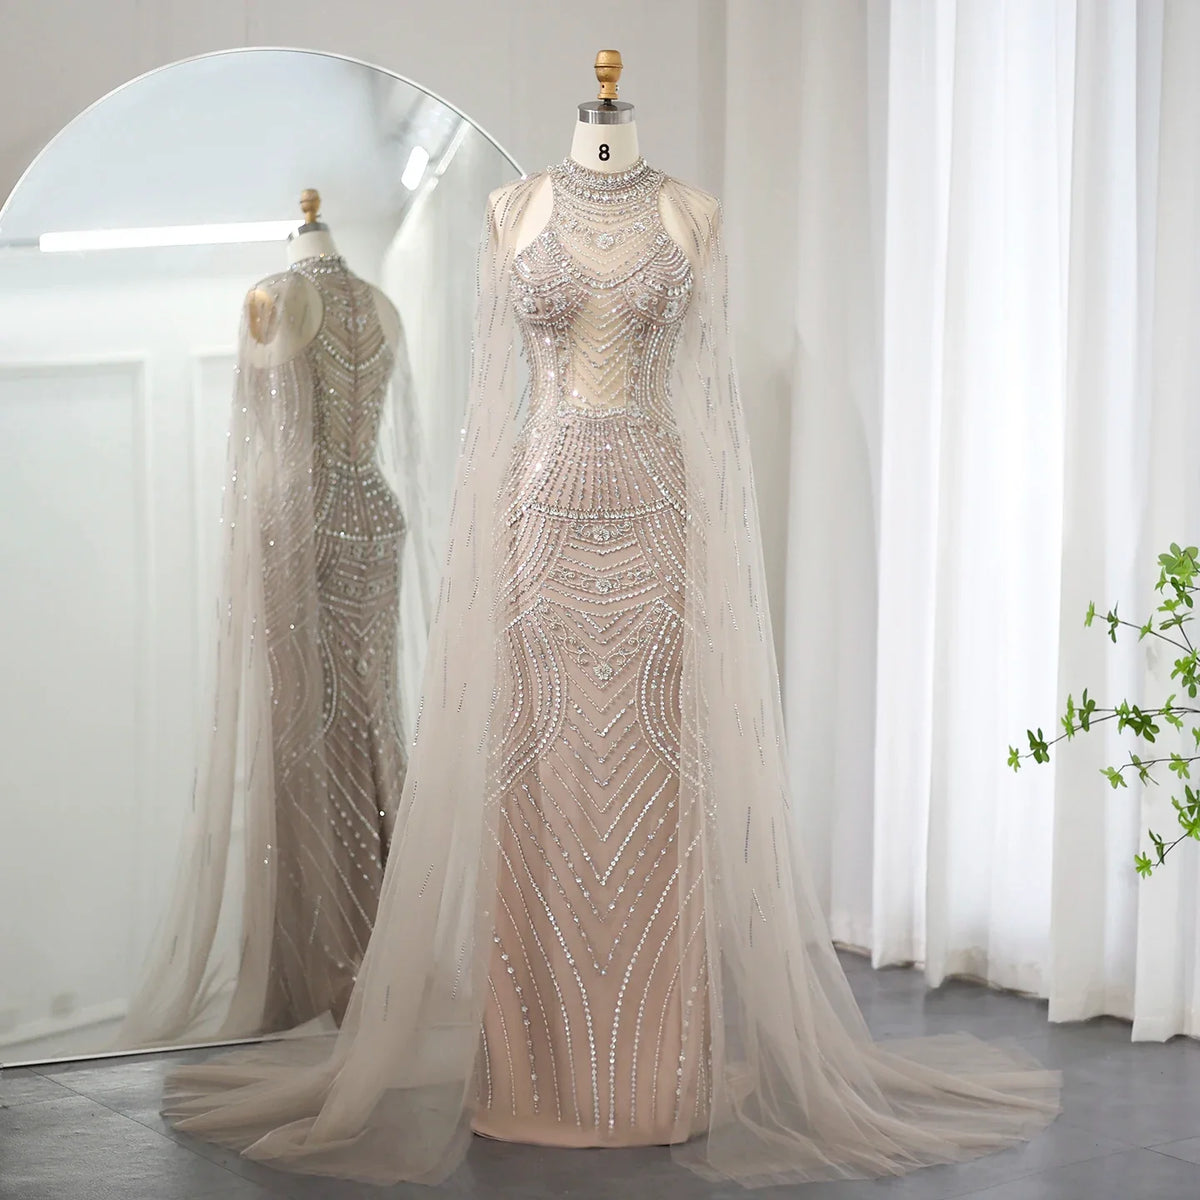 Sharon Said Luxury Dubai Champagne Mermaid Evening Dresses with Cape Sleeves Elegant High Neck Wedding Formal Party Gowns SS230